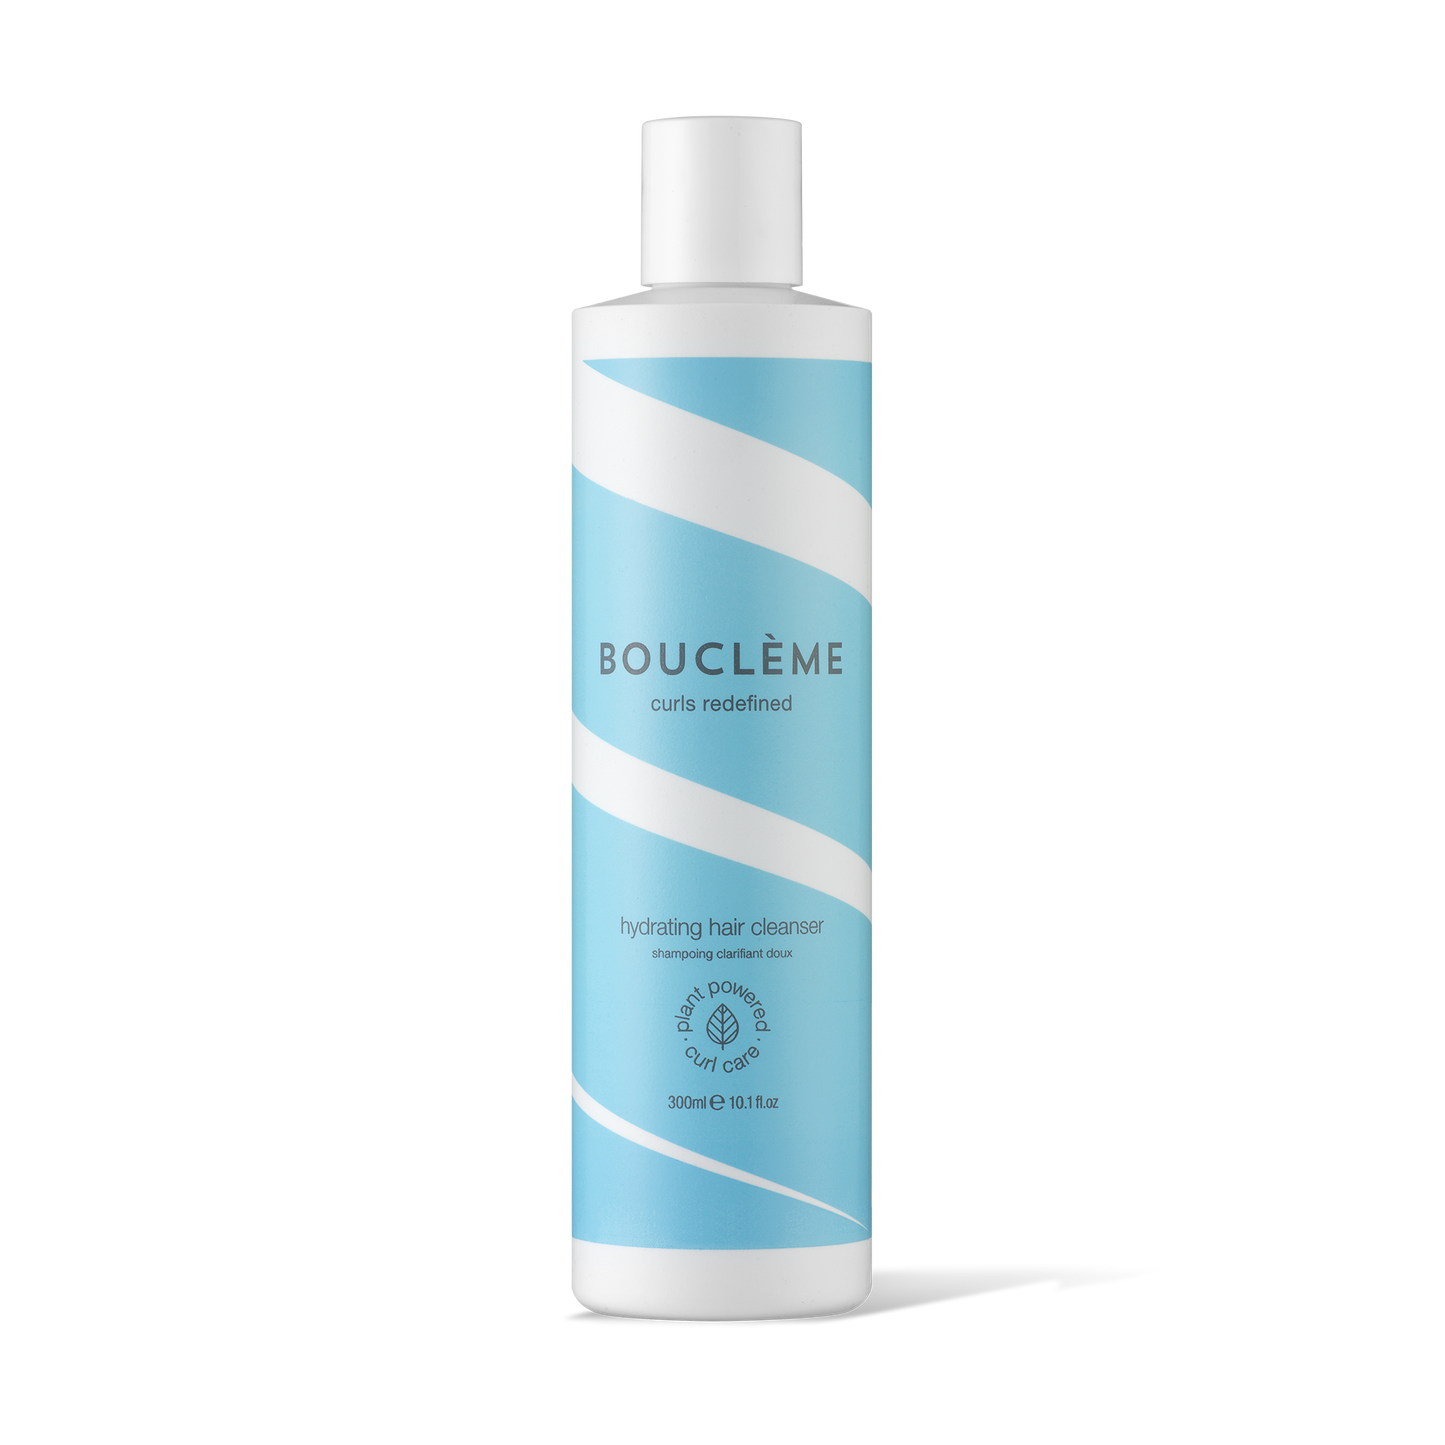 Low foaming, curl defining, sulphate-free shampoo ideal for fine, wavy hair and oily scalps. 